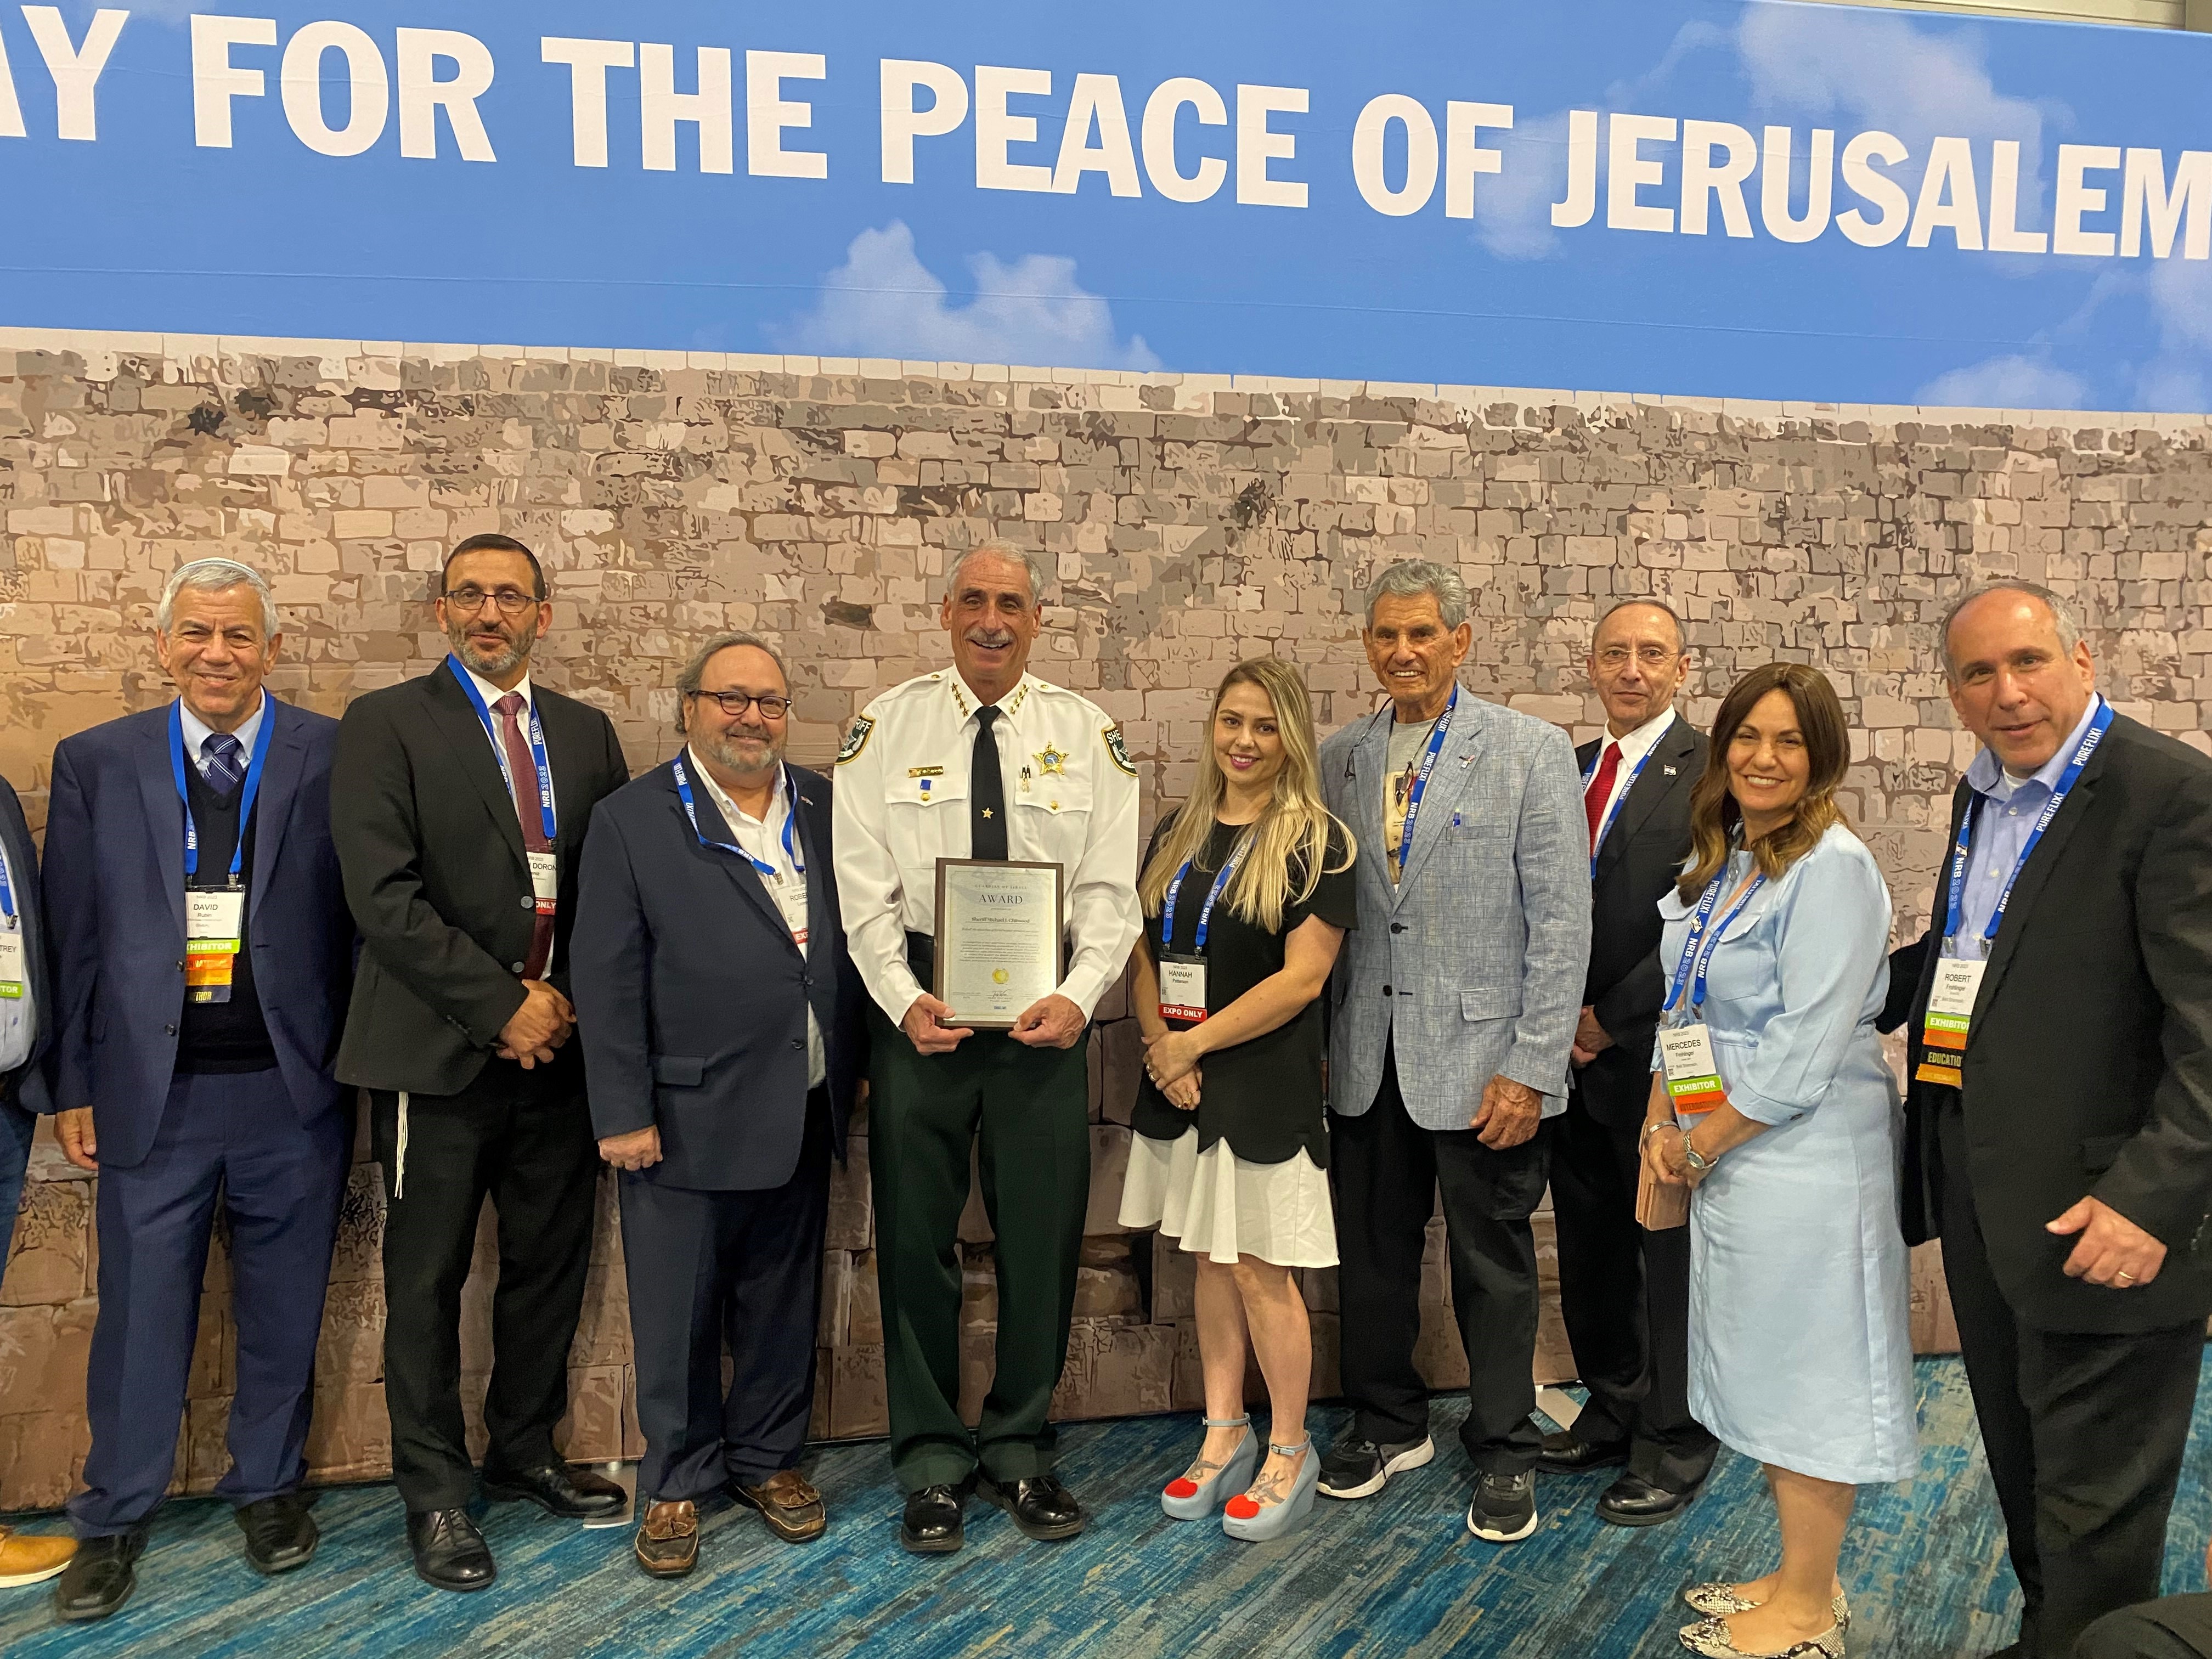 'Guardian of Israel' Award Presented To Sheriff Chitwood By Israeli Community Leaders Image